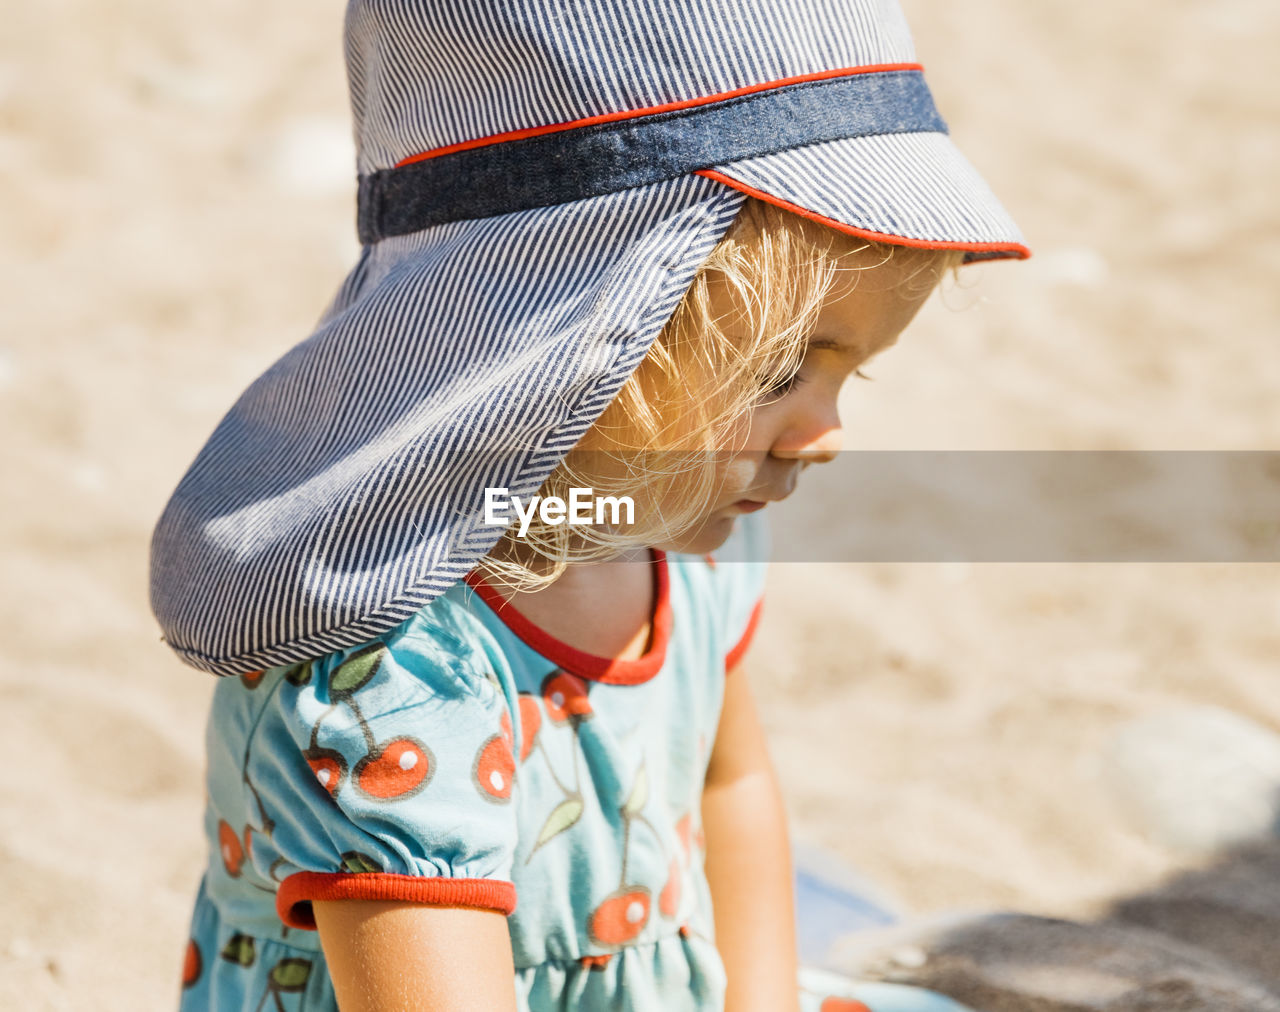 Midsection of girl wearing hat on sand